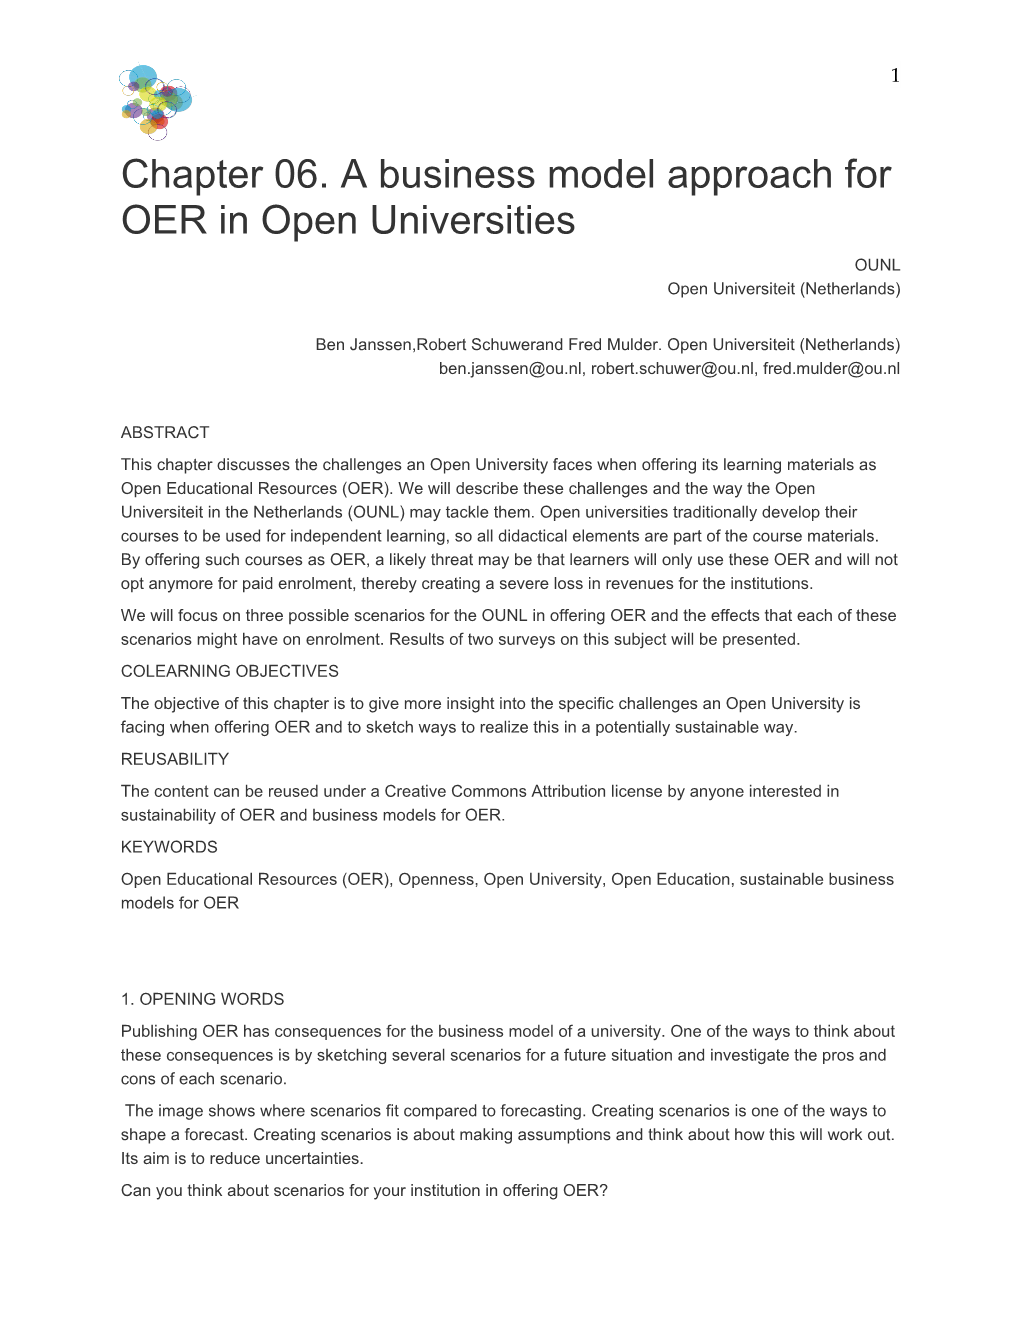 Chapter 06. a Business Model Approach for OER in Open Universities